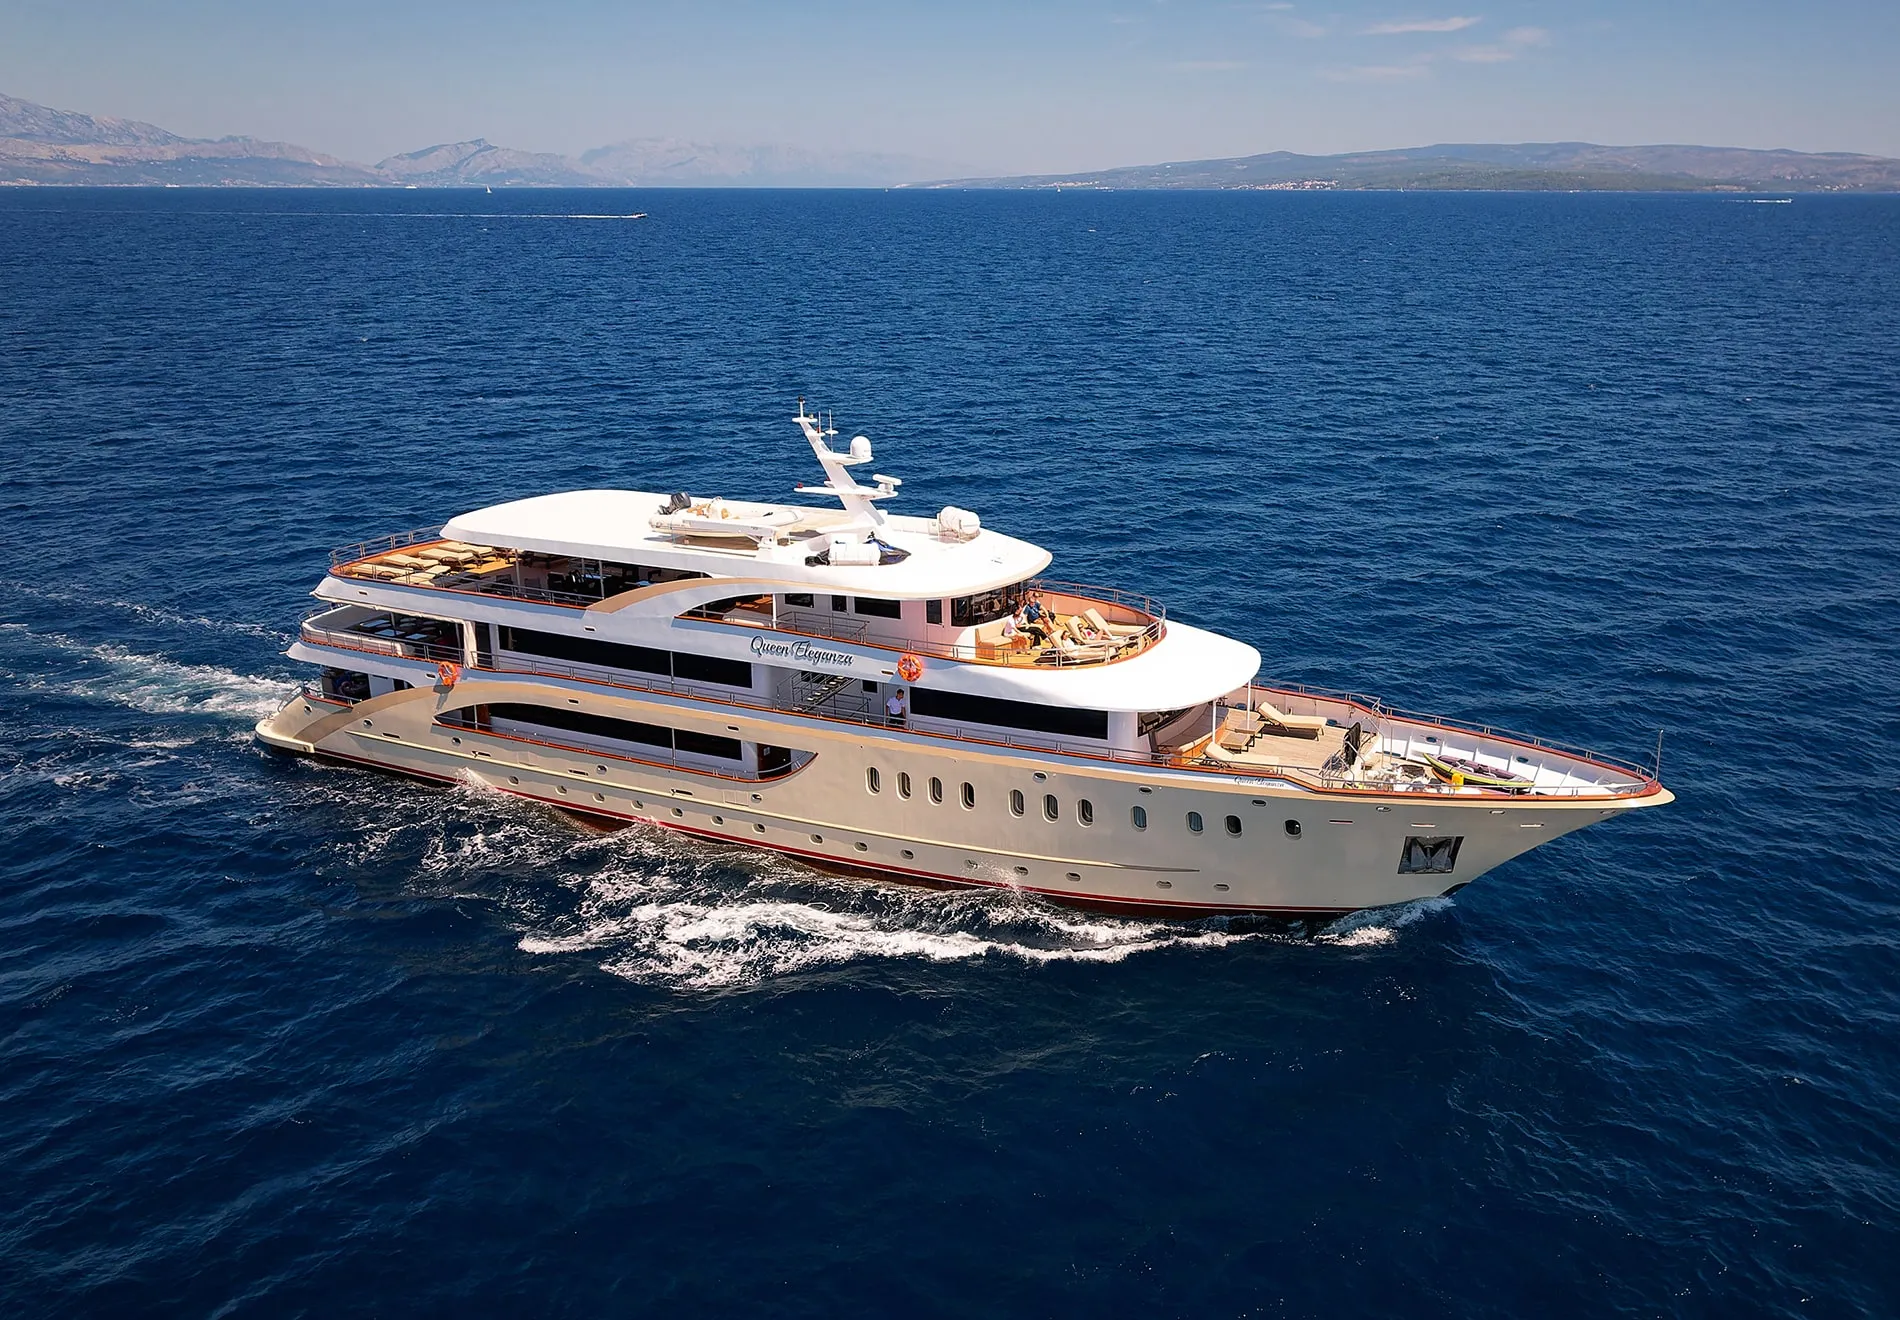 How do DS Yachts in Croatia differ from other superyachts in the world